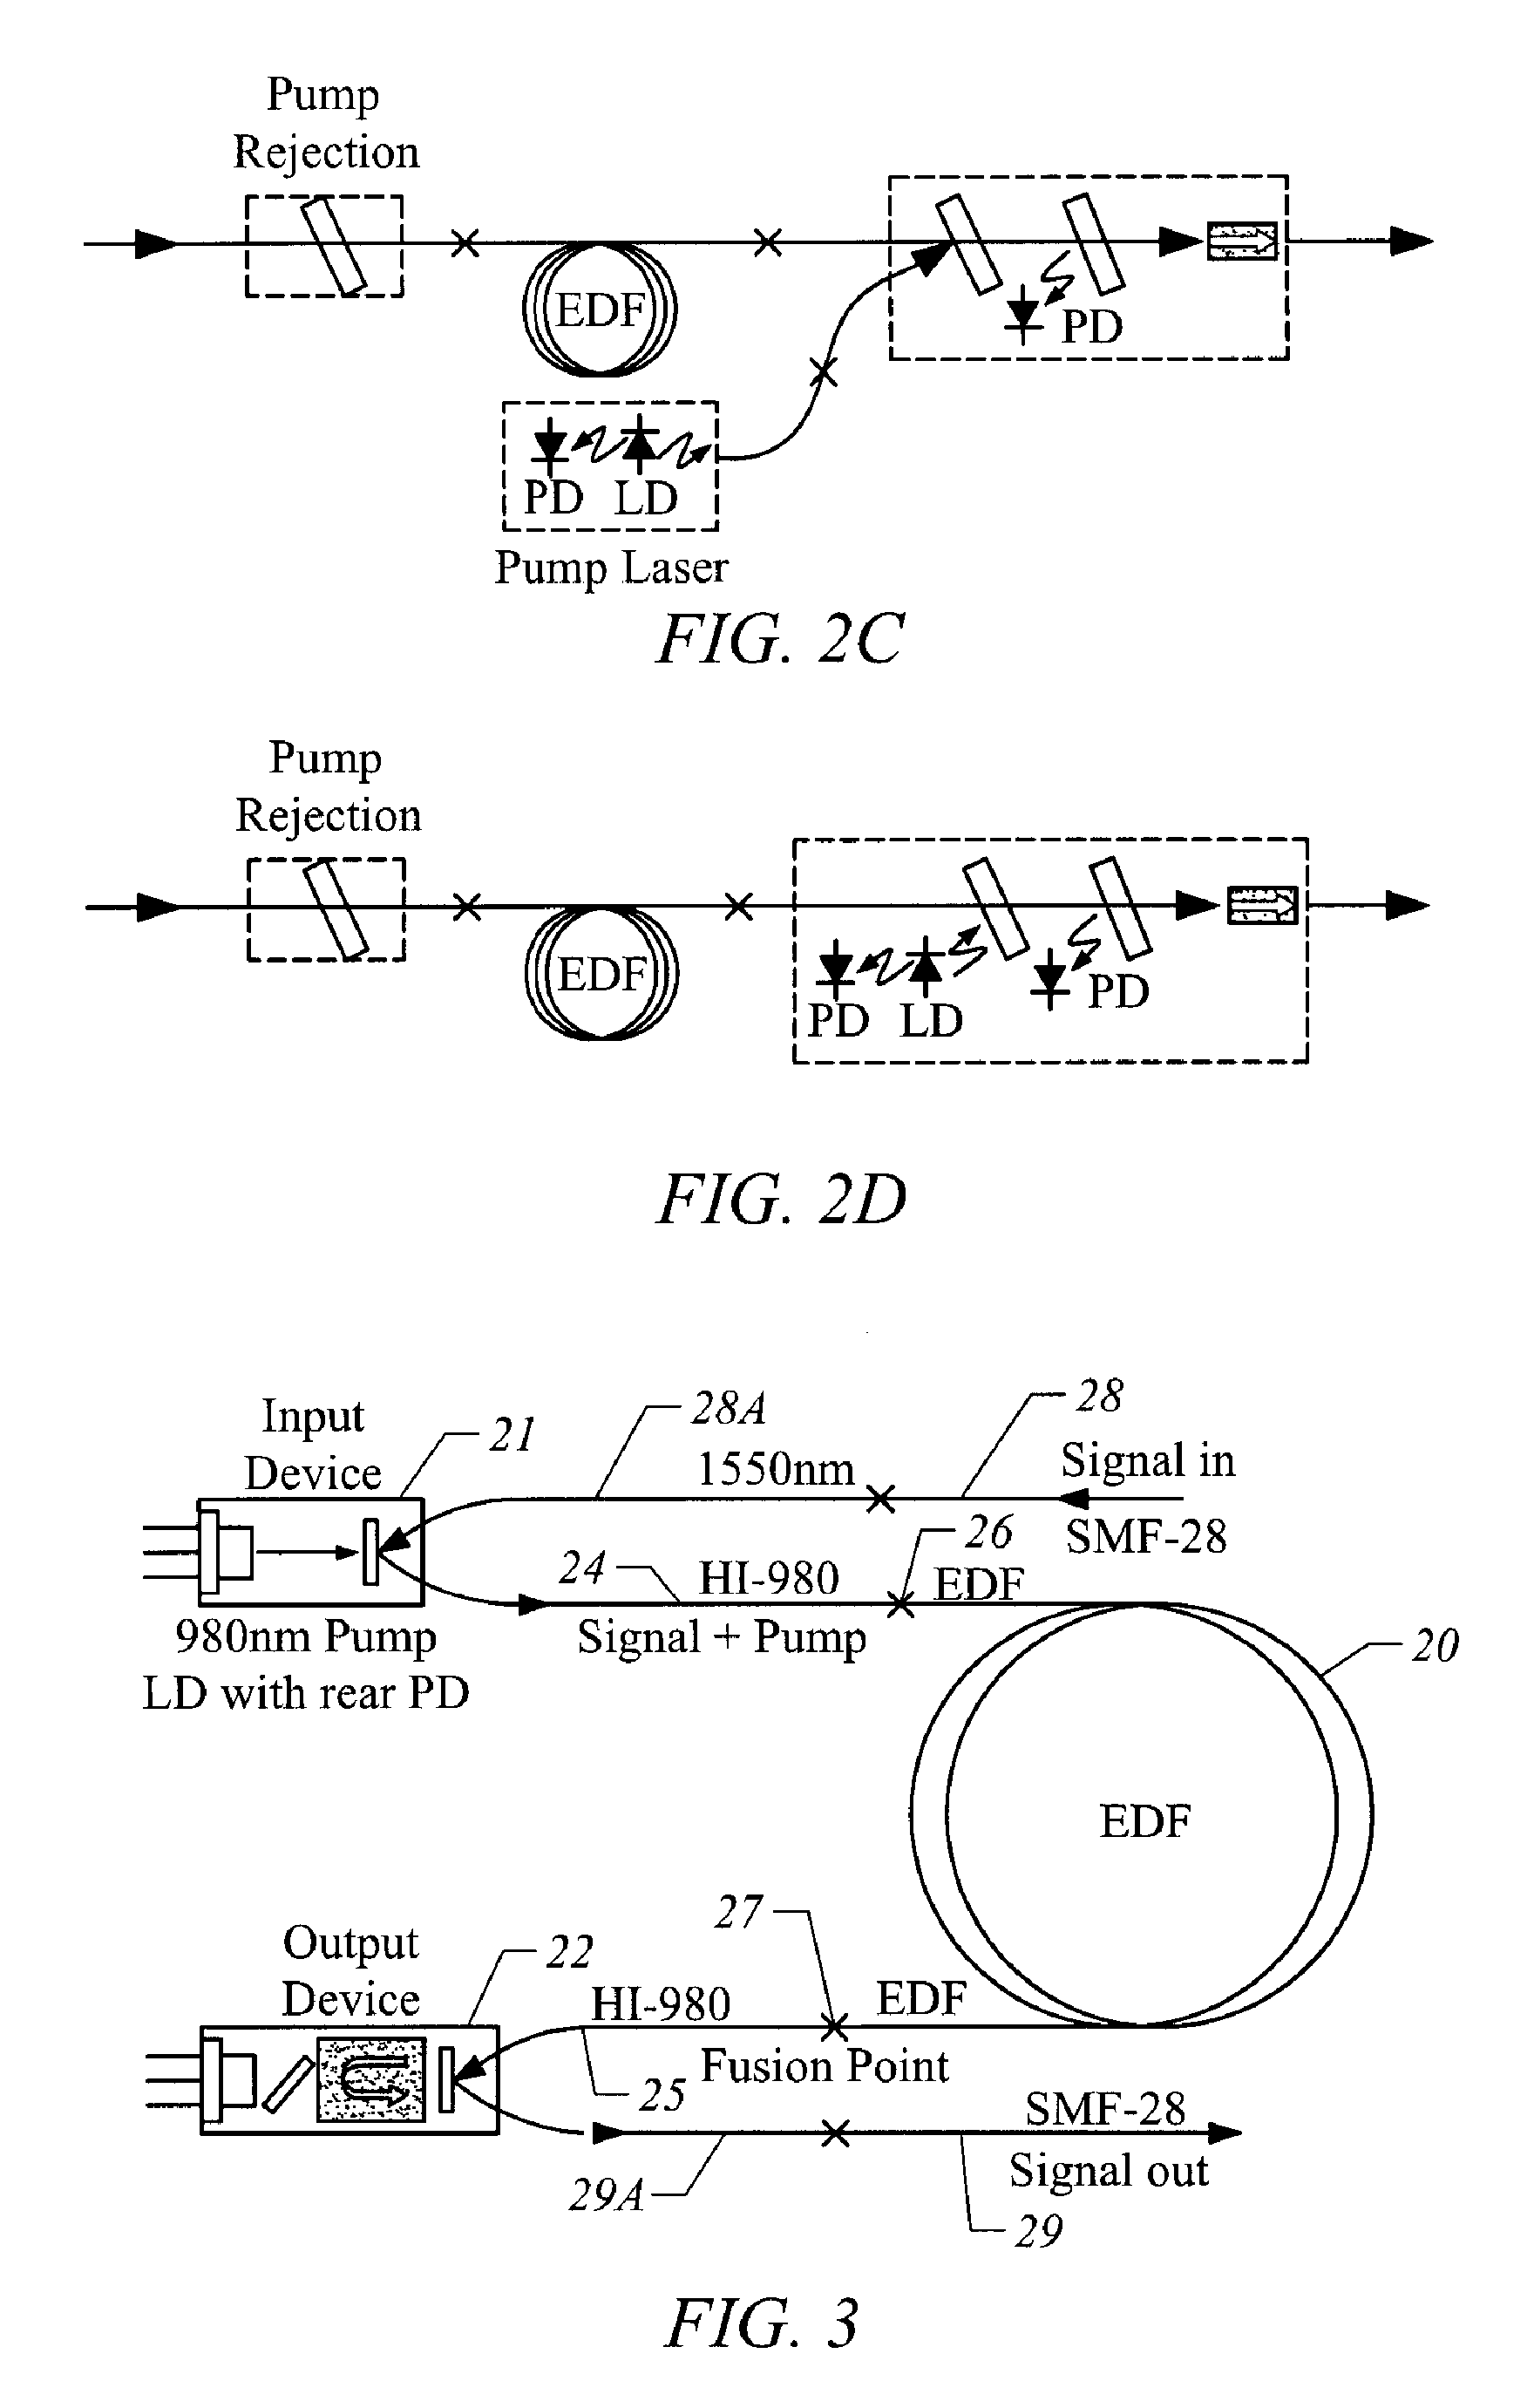 Erbium-doped fiber amplifier and integrated circuit module components